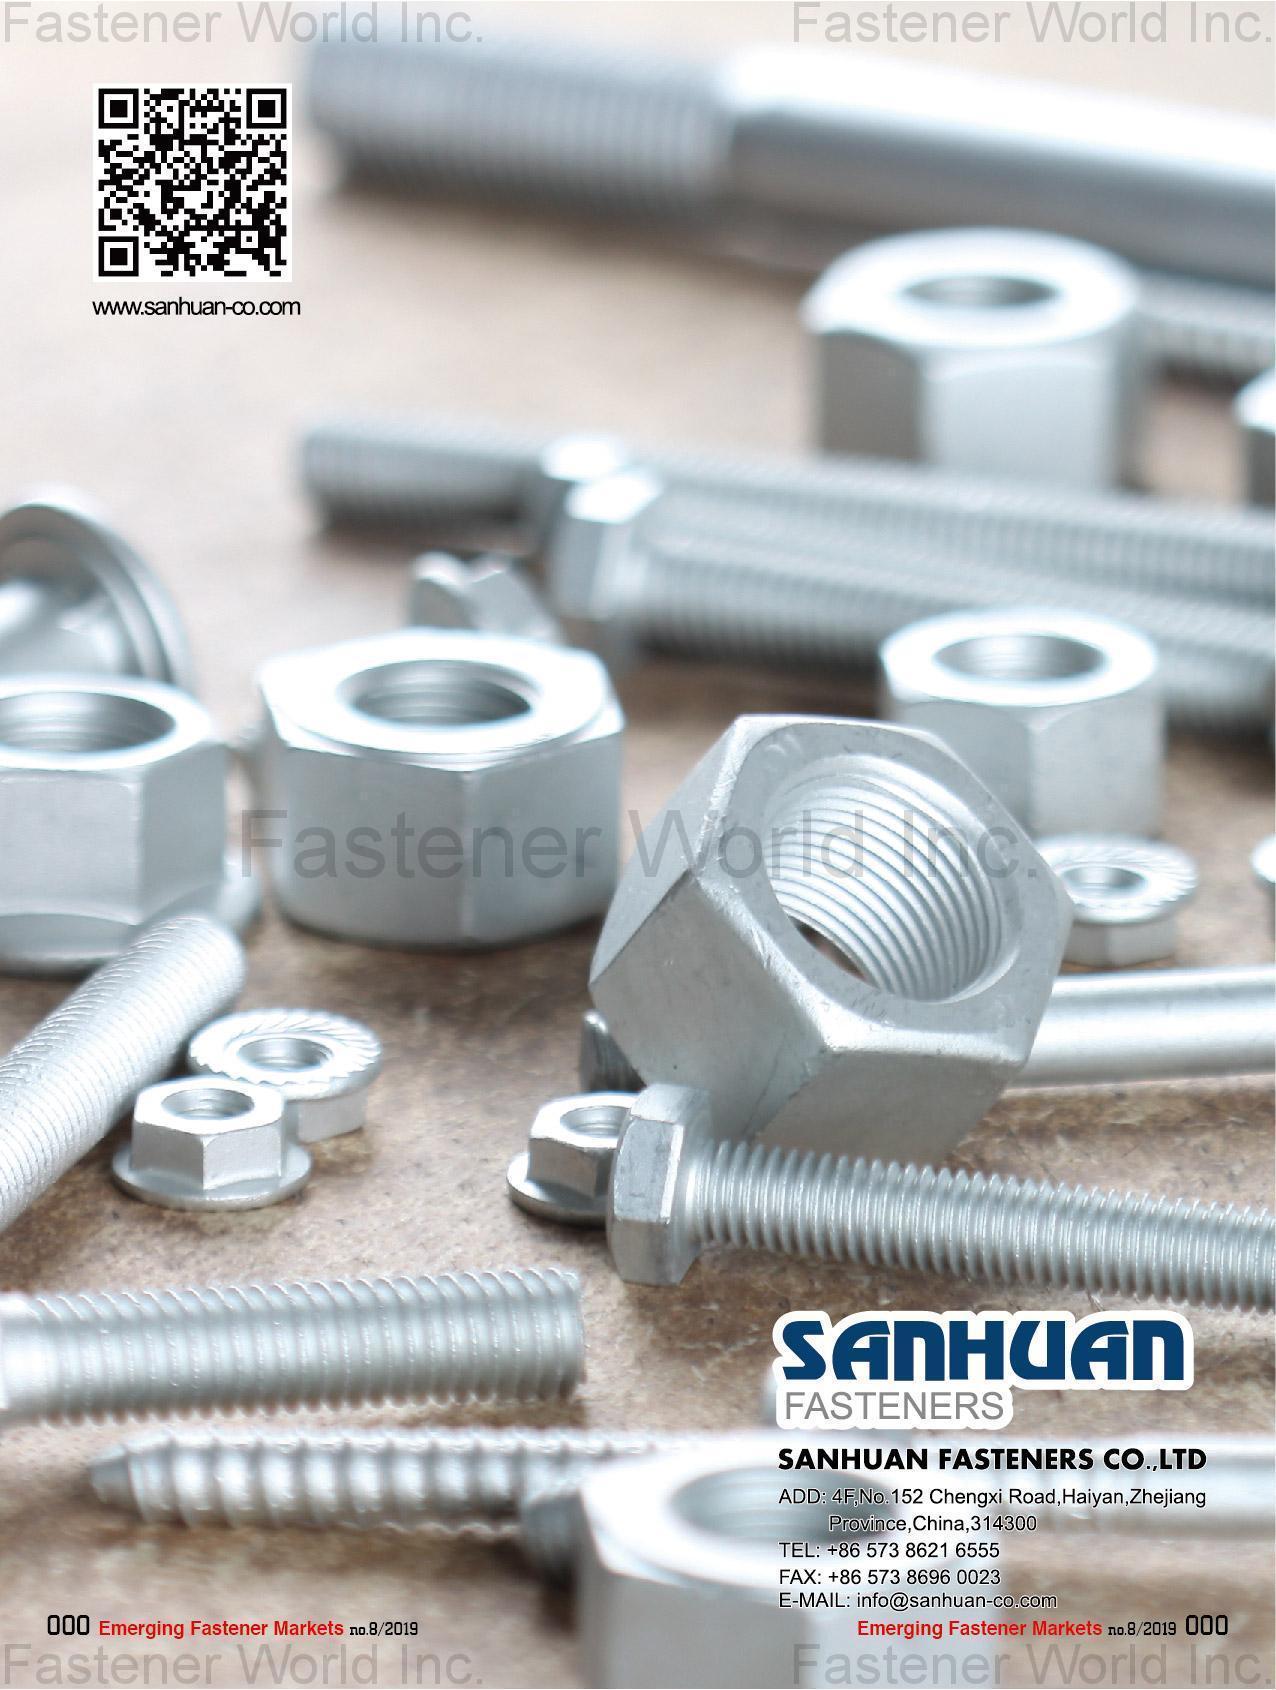 HAIYAN SANHUAN FASTENERS CO., LTD. , standard and nonstandard fasteners and hardware components